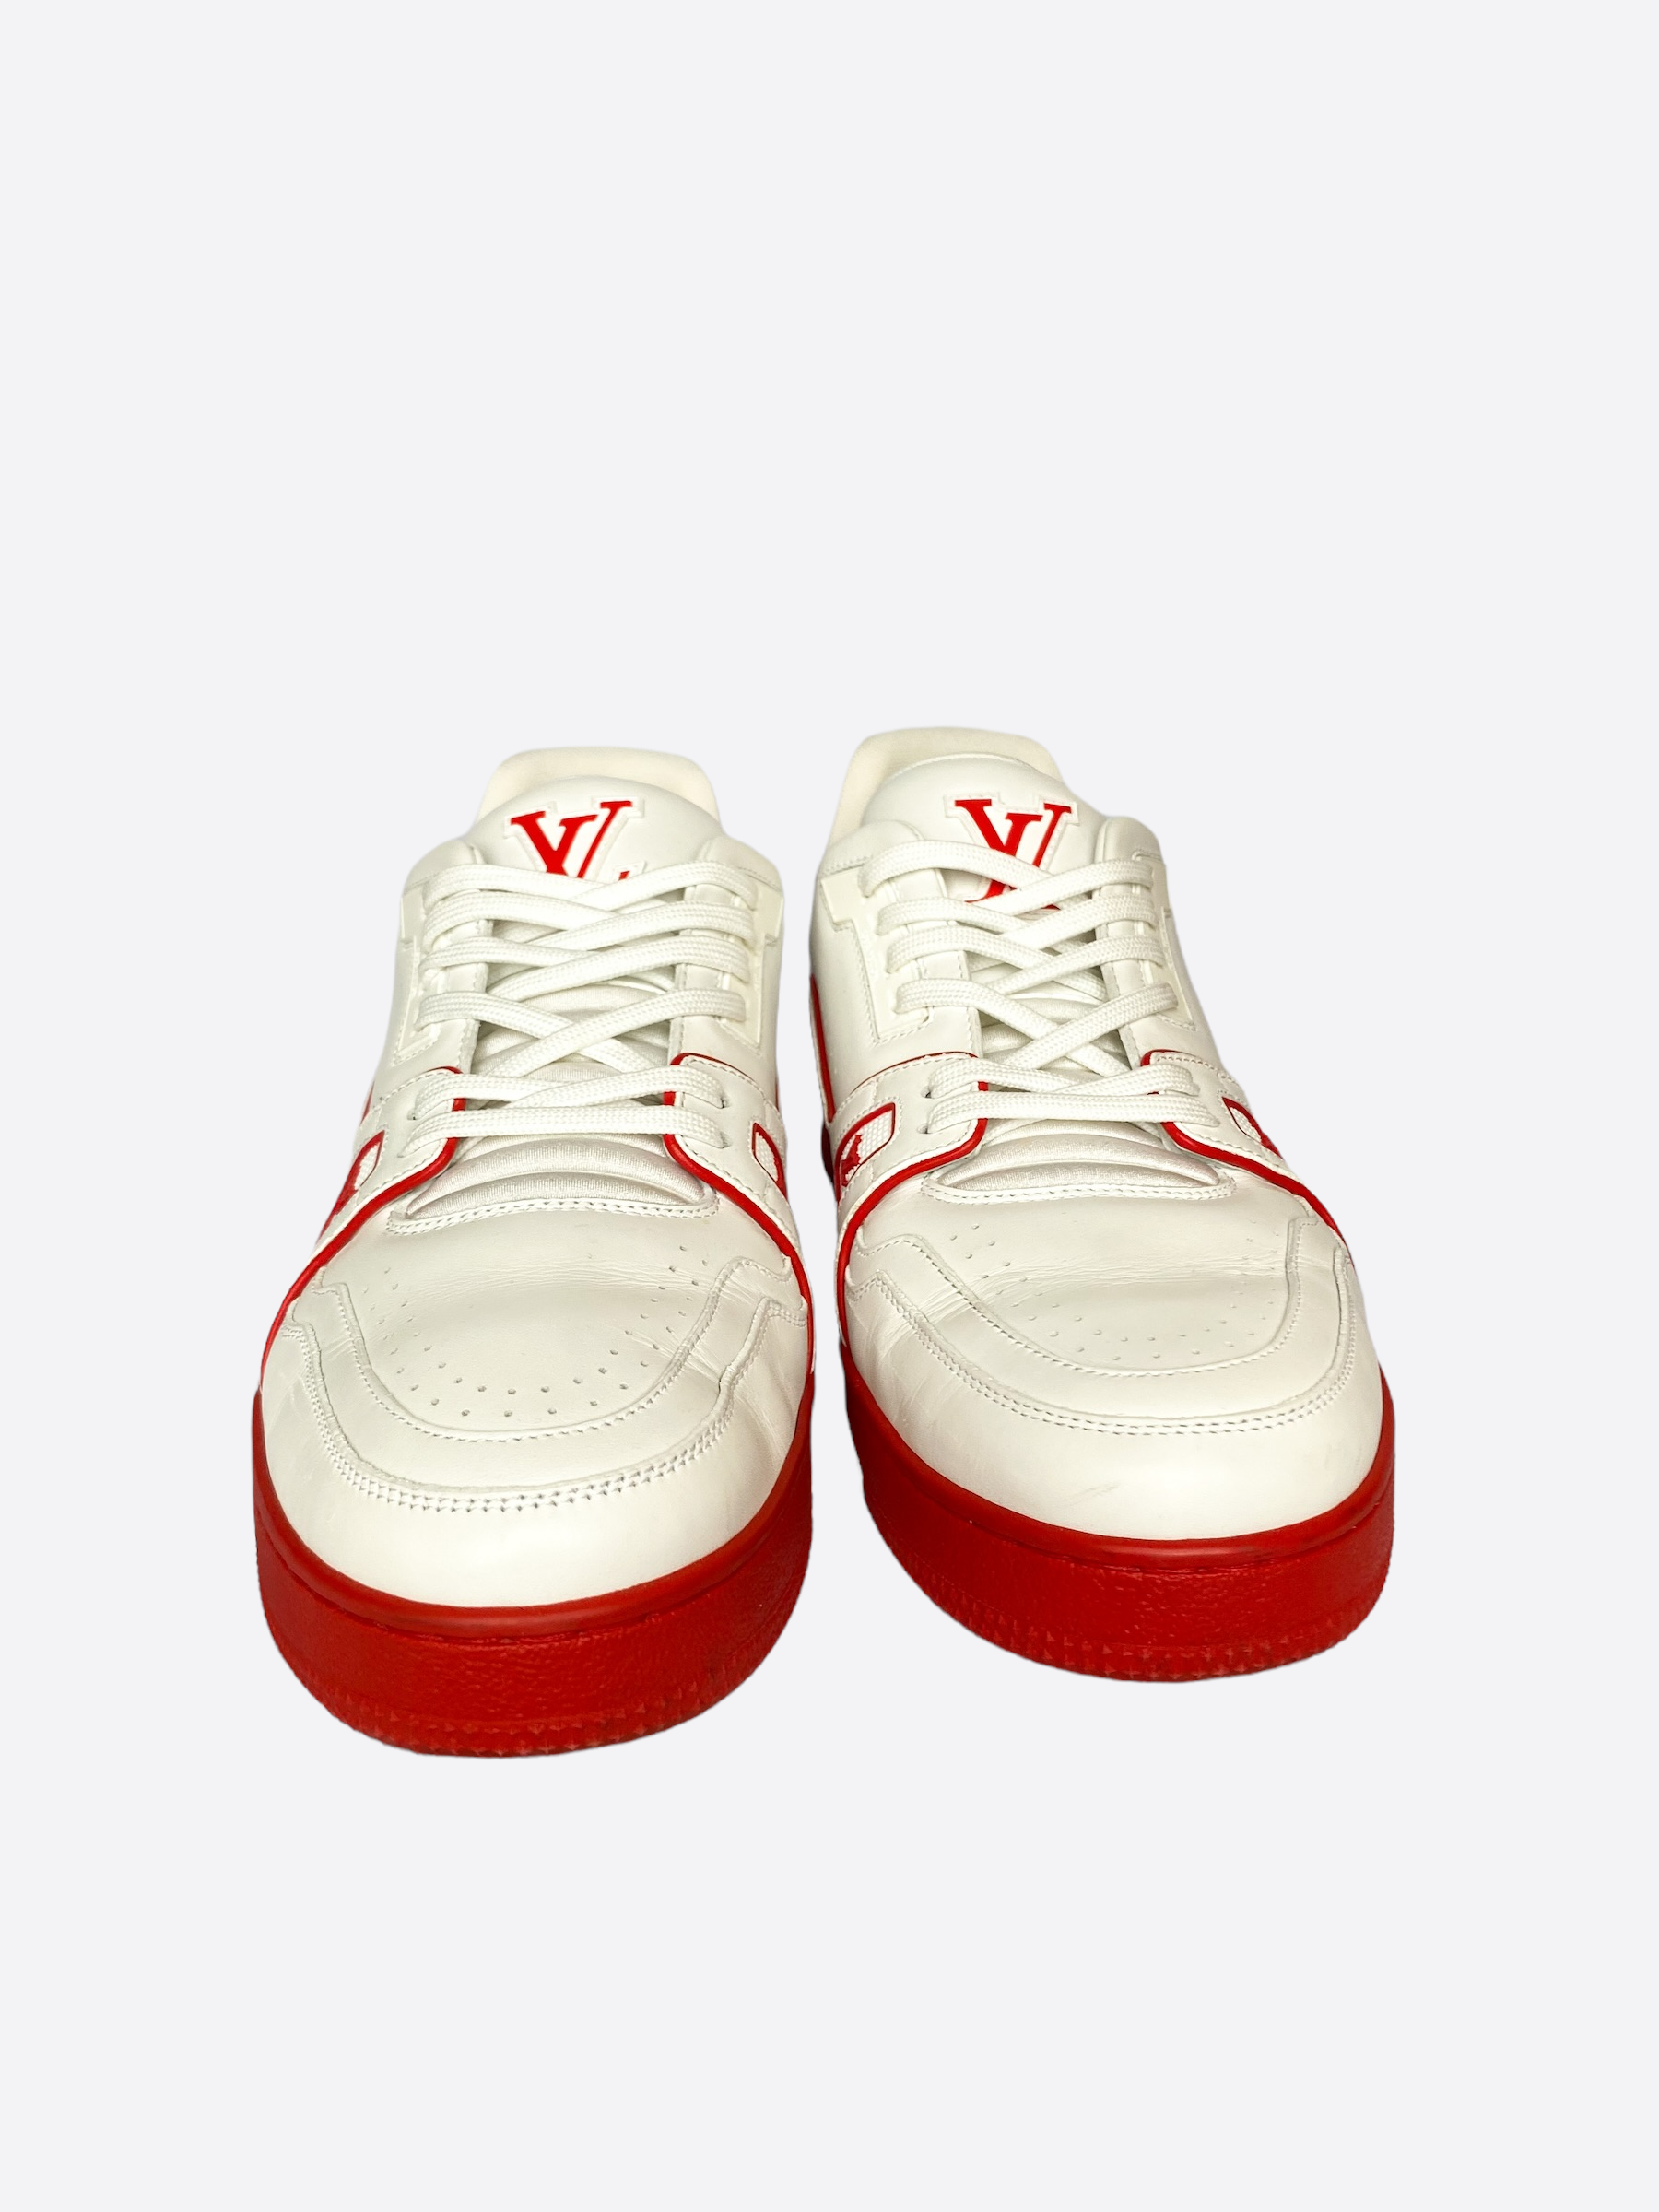 LOUIS VUITTON Monogram leather low-cut sneakers/ shoes 7 Red/Silver/White